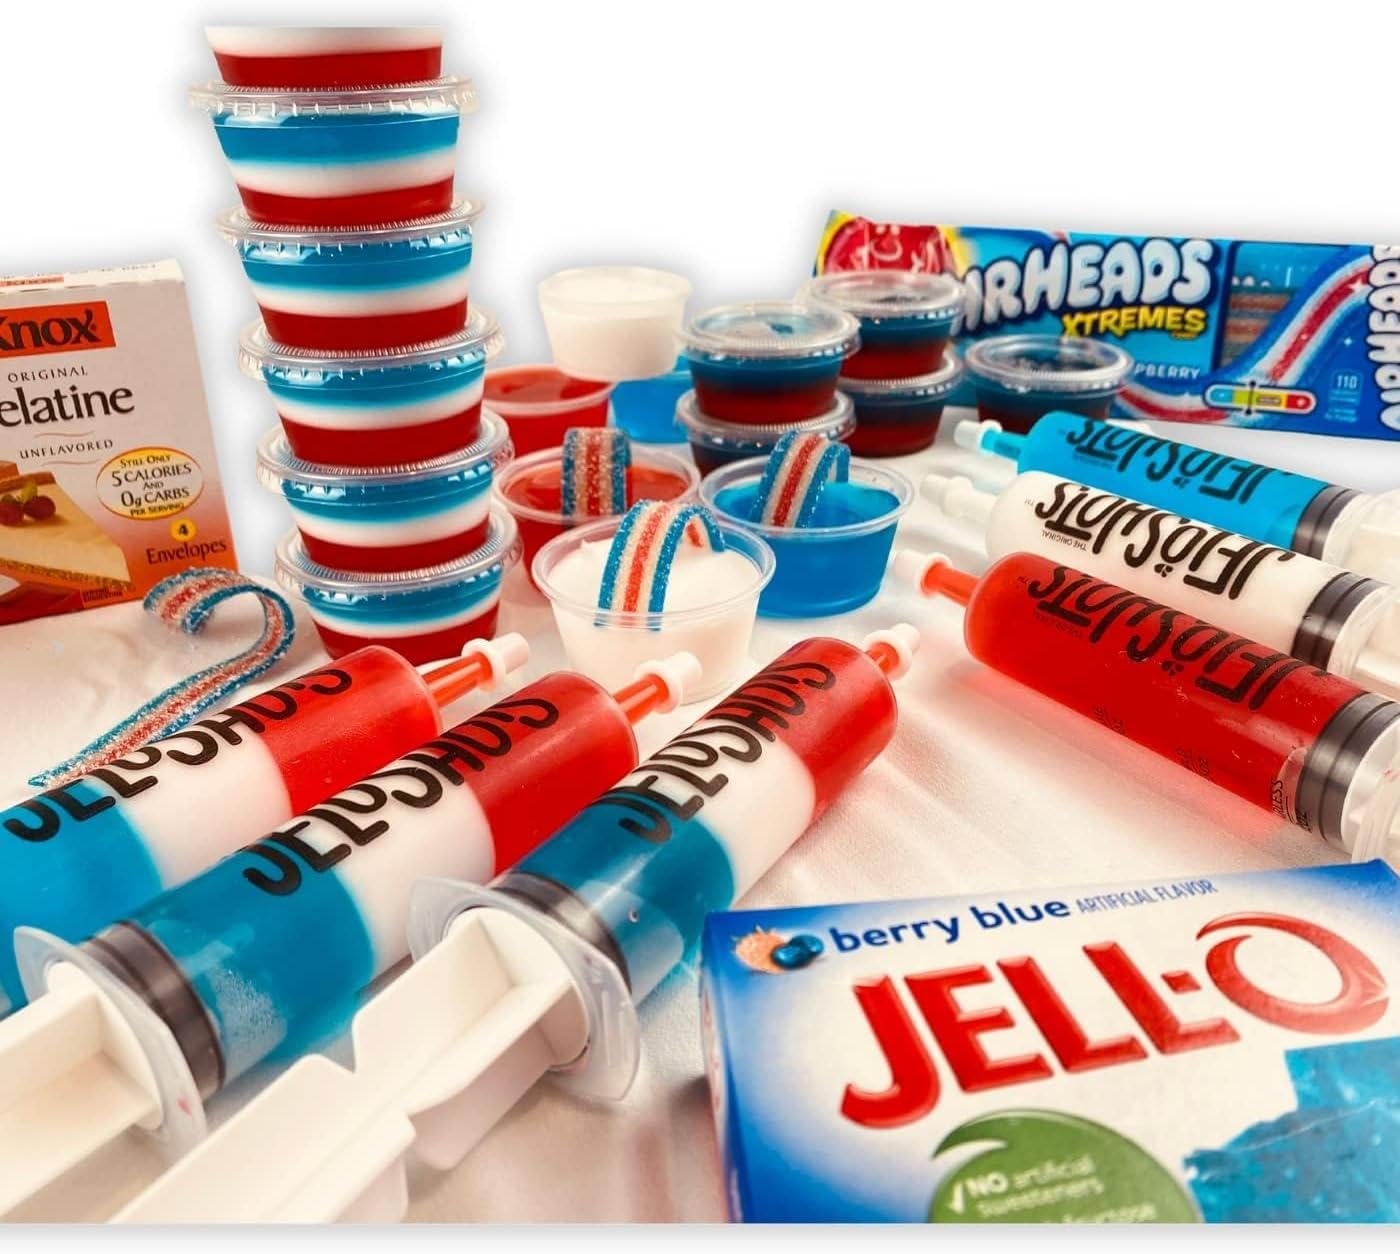 Jello Shot Syringes by JeloShots 32 Pack - Free Recipe eBook, Prewashed & Ready to Use, Jelly Shot Syringes for St. Patrick's Day, Nurses, Graduation, and Bachelorette Parties, Halloween Party Fun